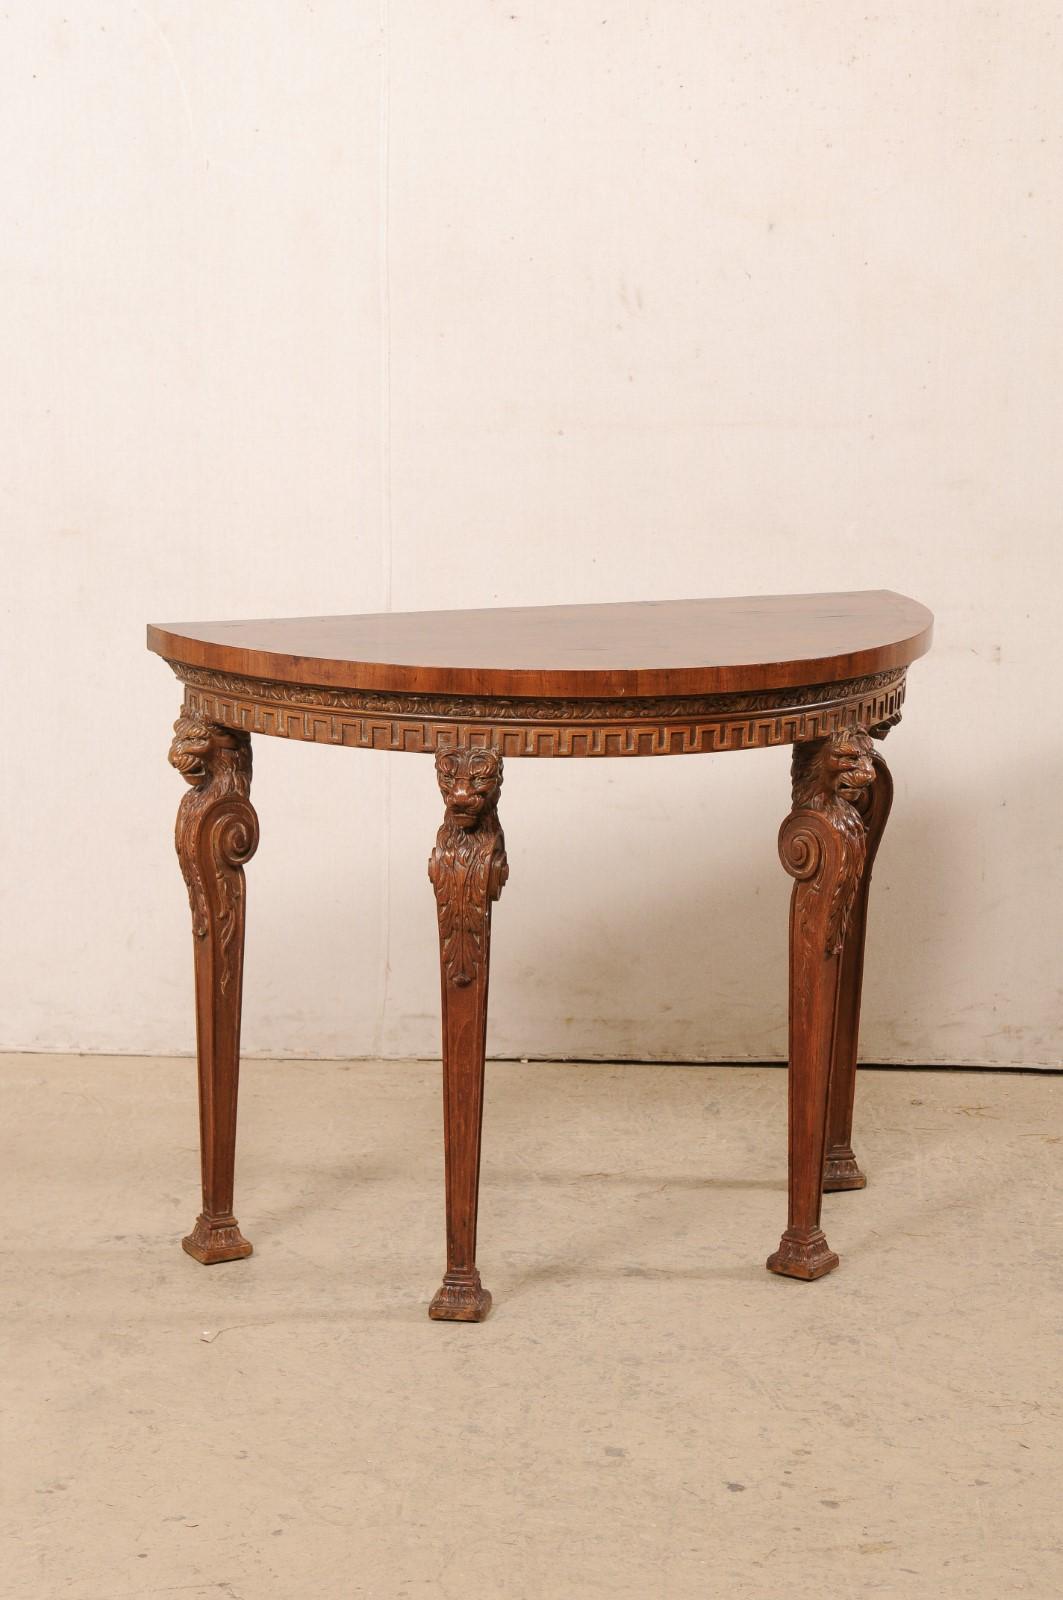 An English beautifully-carved wood demi-lune table from the 19th century. This antique console table from England features a half-moon shaped top which overhands and rests upon an apron adorn in bands of foliage-carved trim with Greek key trim